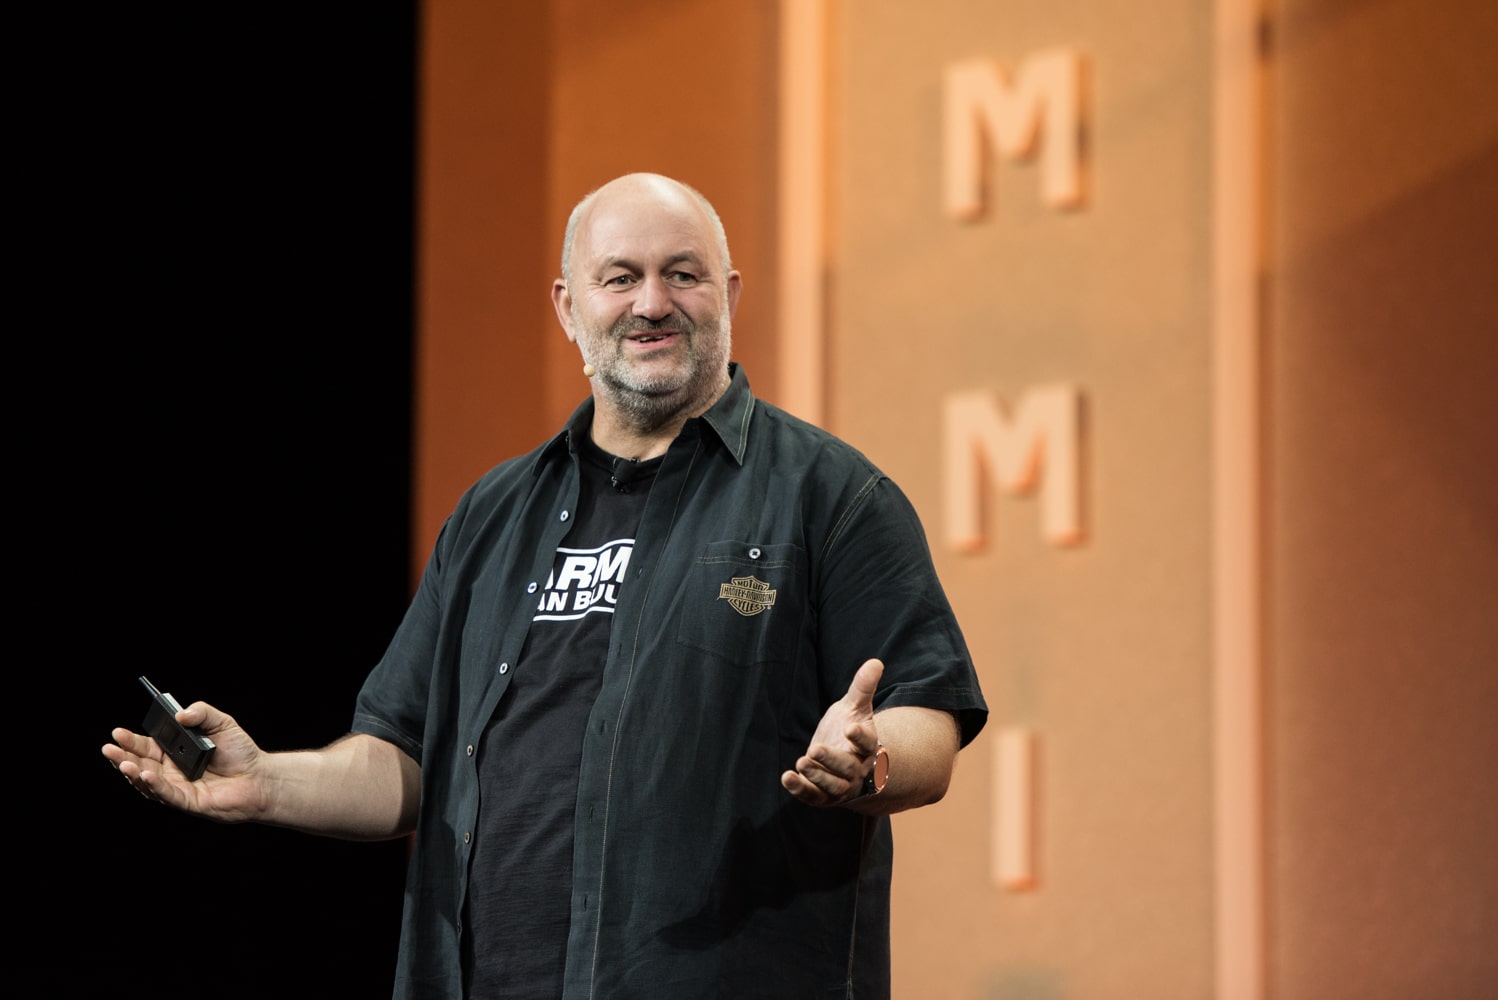 Amazon’s CTO & VP Werner Vogels will be speaking at BRAND MINDS 2020